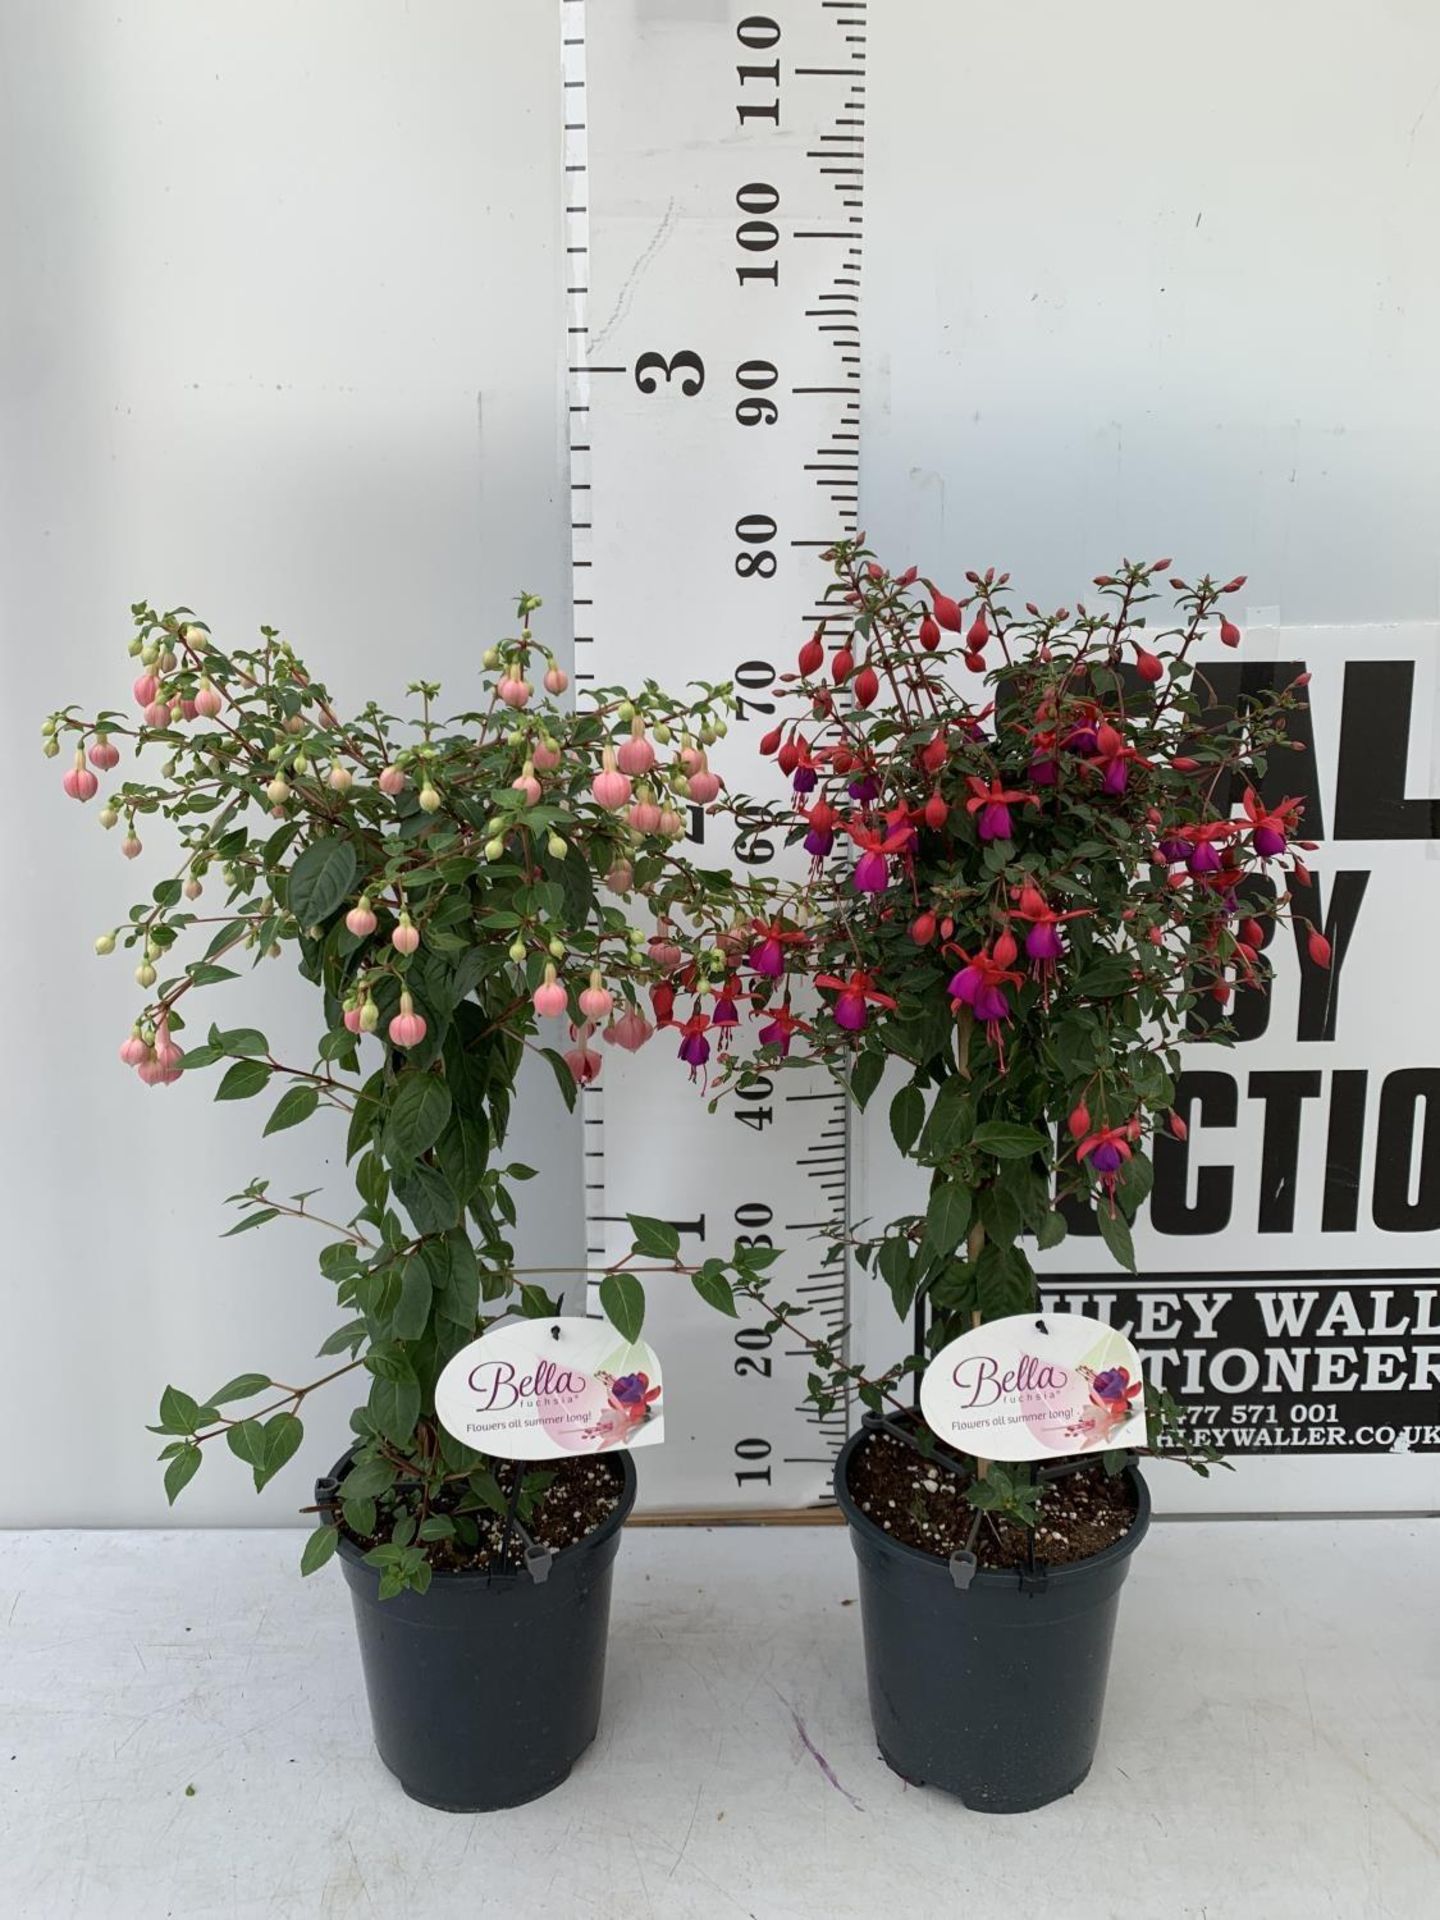 TWO BELLA STANDARD FUCHSIA IN A 3 LTR POTS 70CM -80CM TALL TO BE SOLD FOR THE TWO PLUS VAT - Image 2 of 8